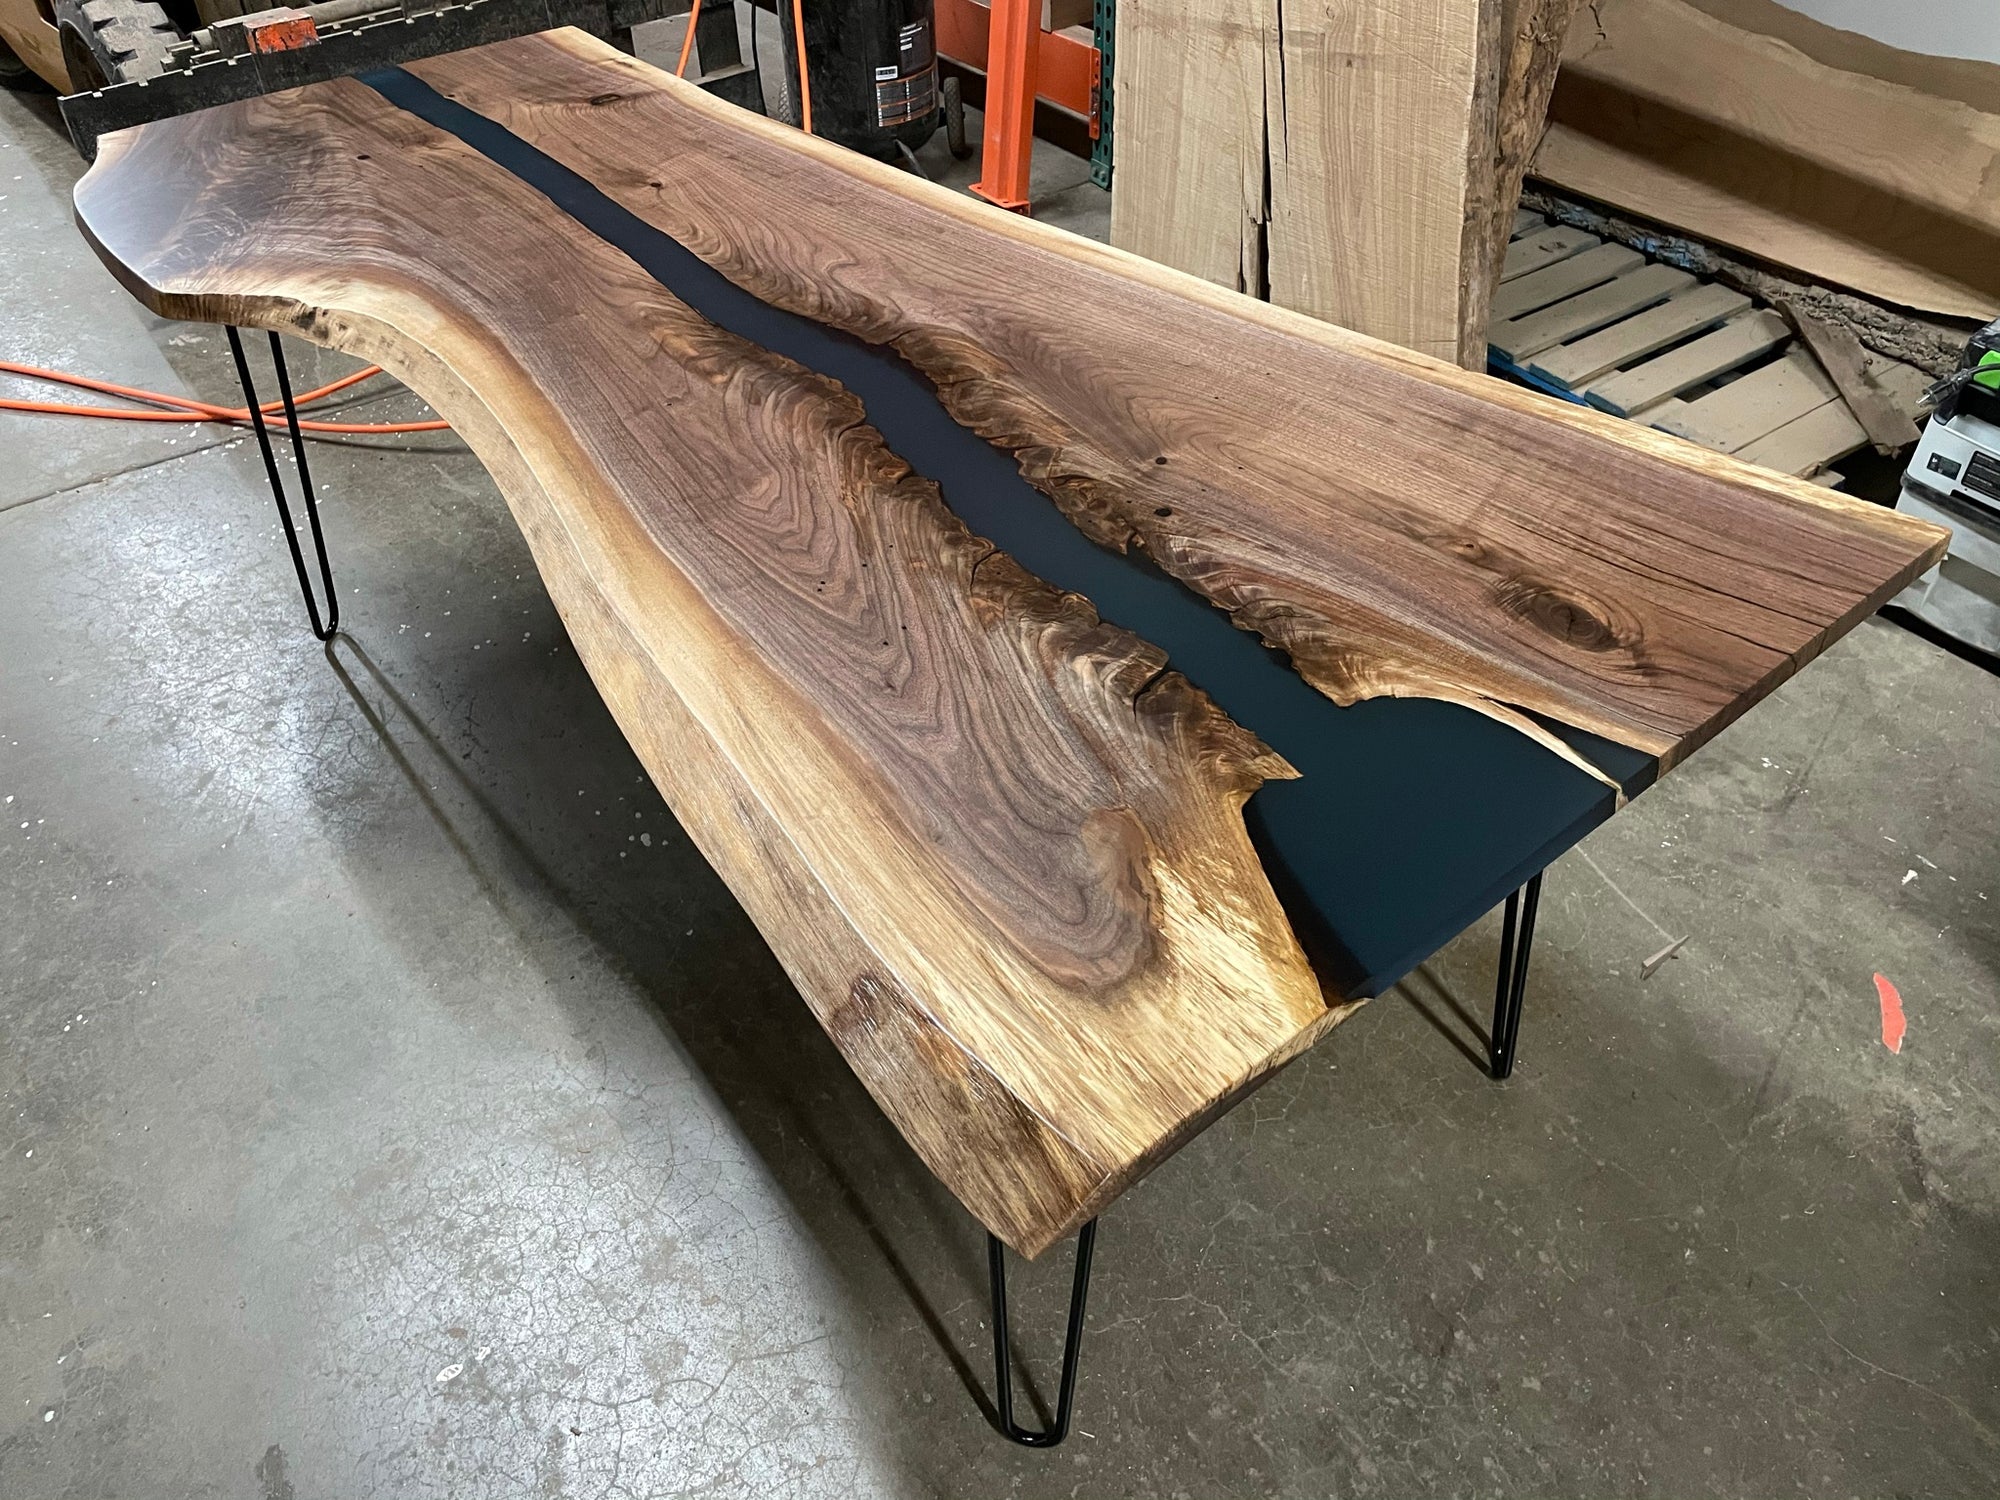 Epoxy River Coffee Table – Nantucket Whales